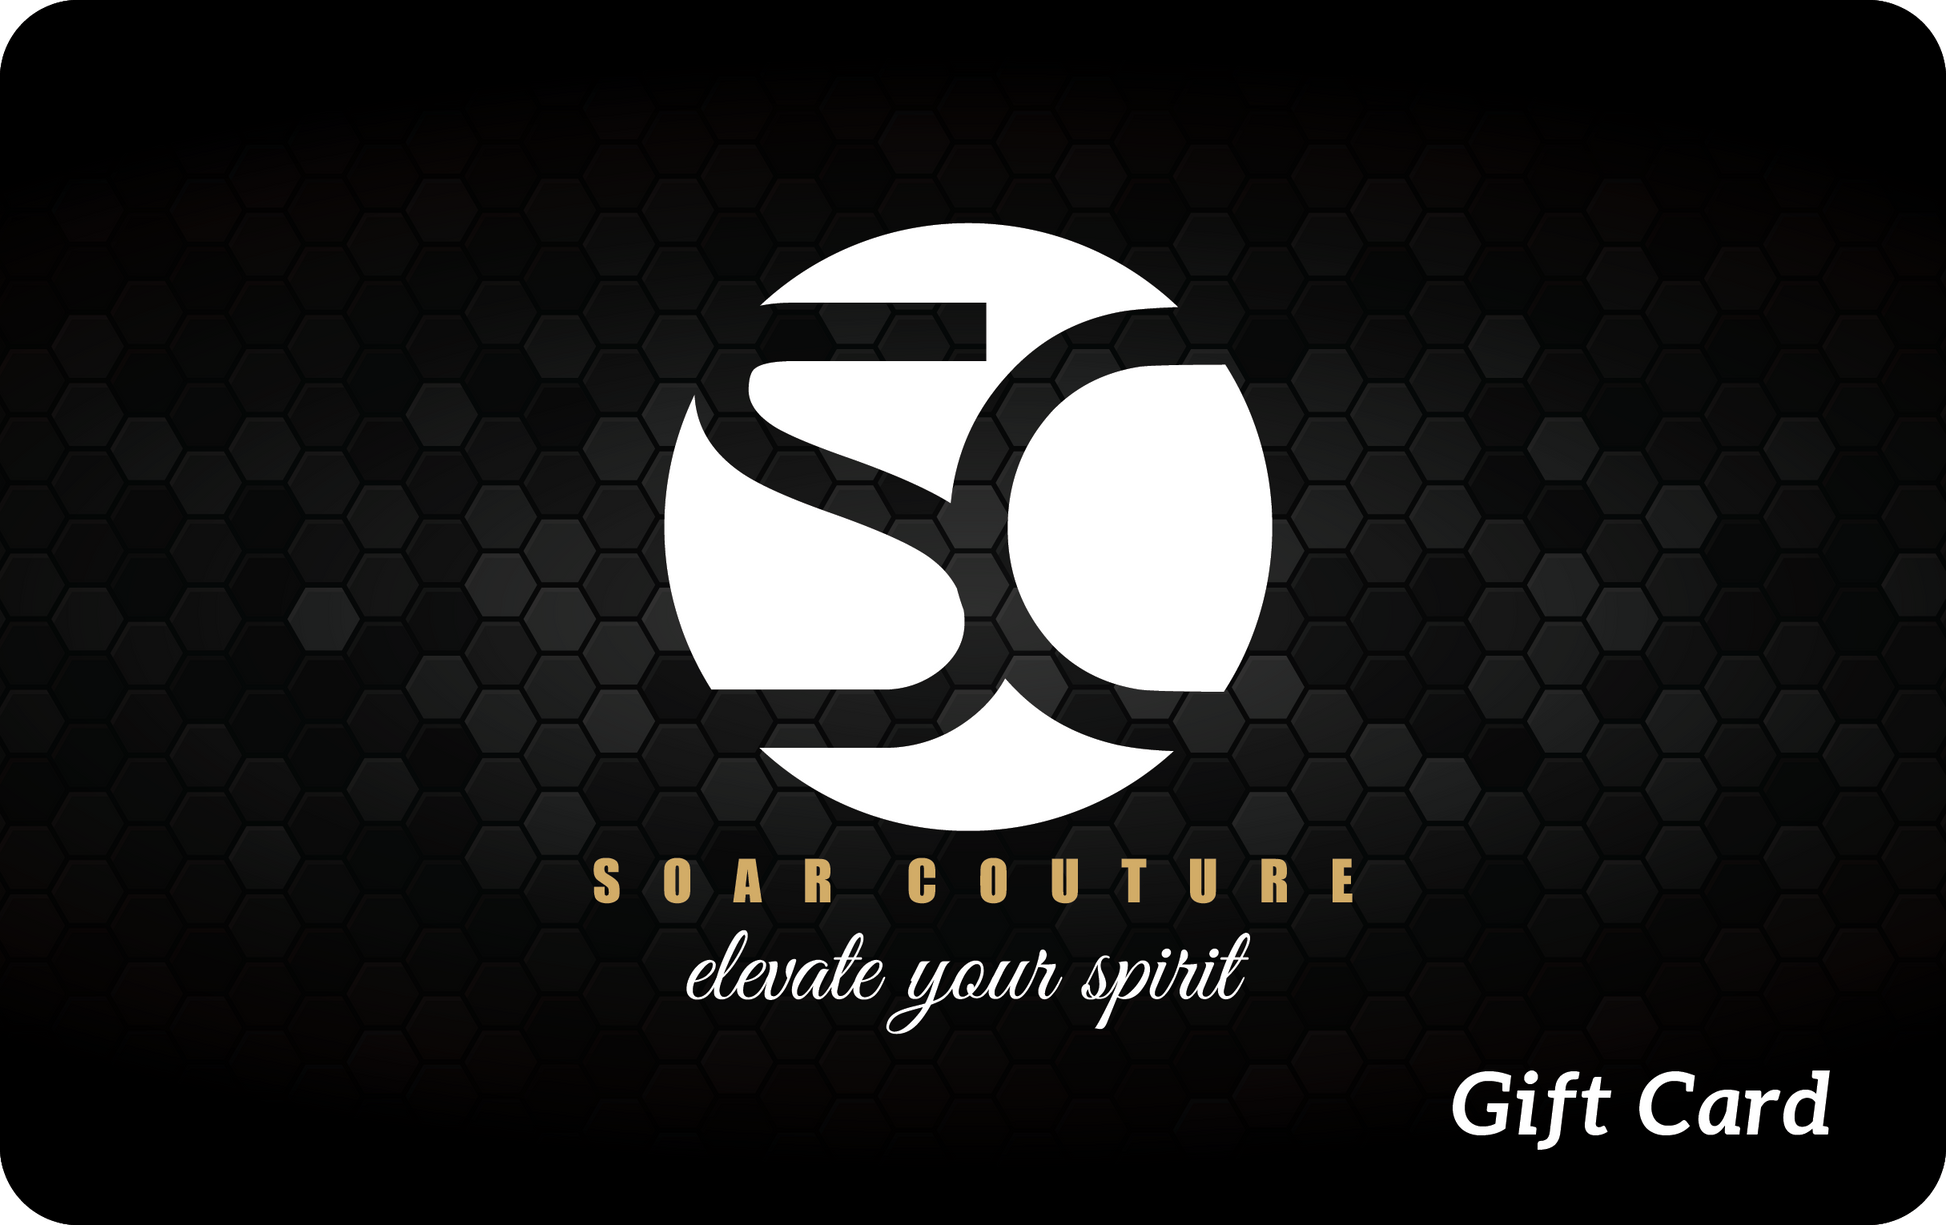 Gift Card 5 - SoarCouture